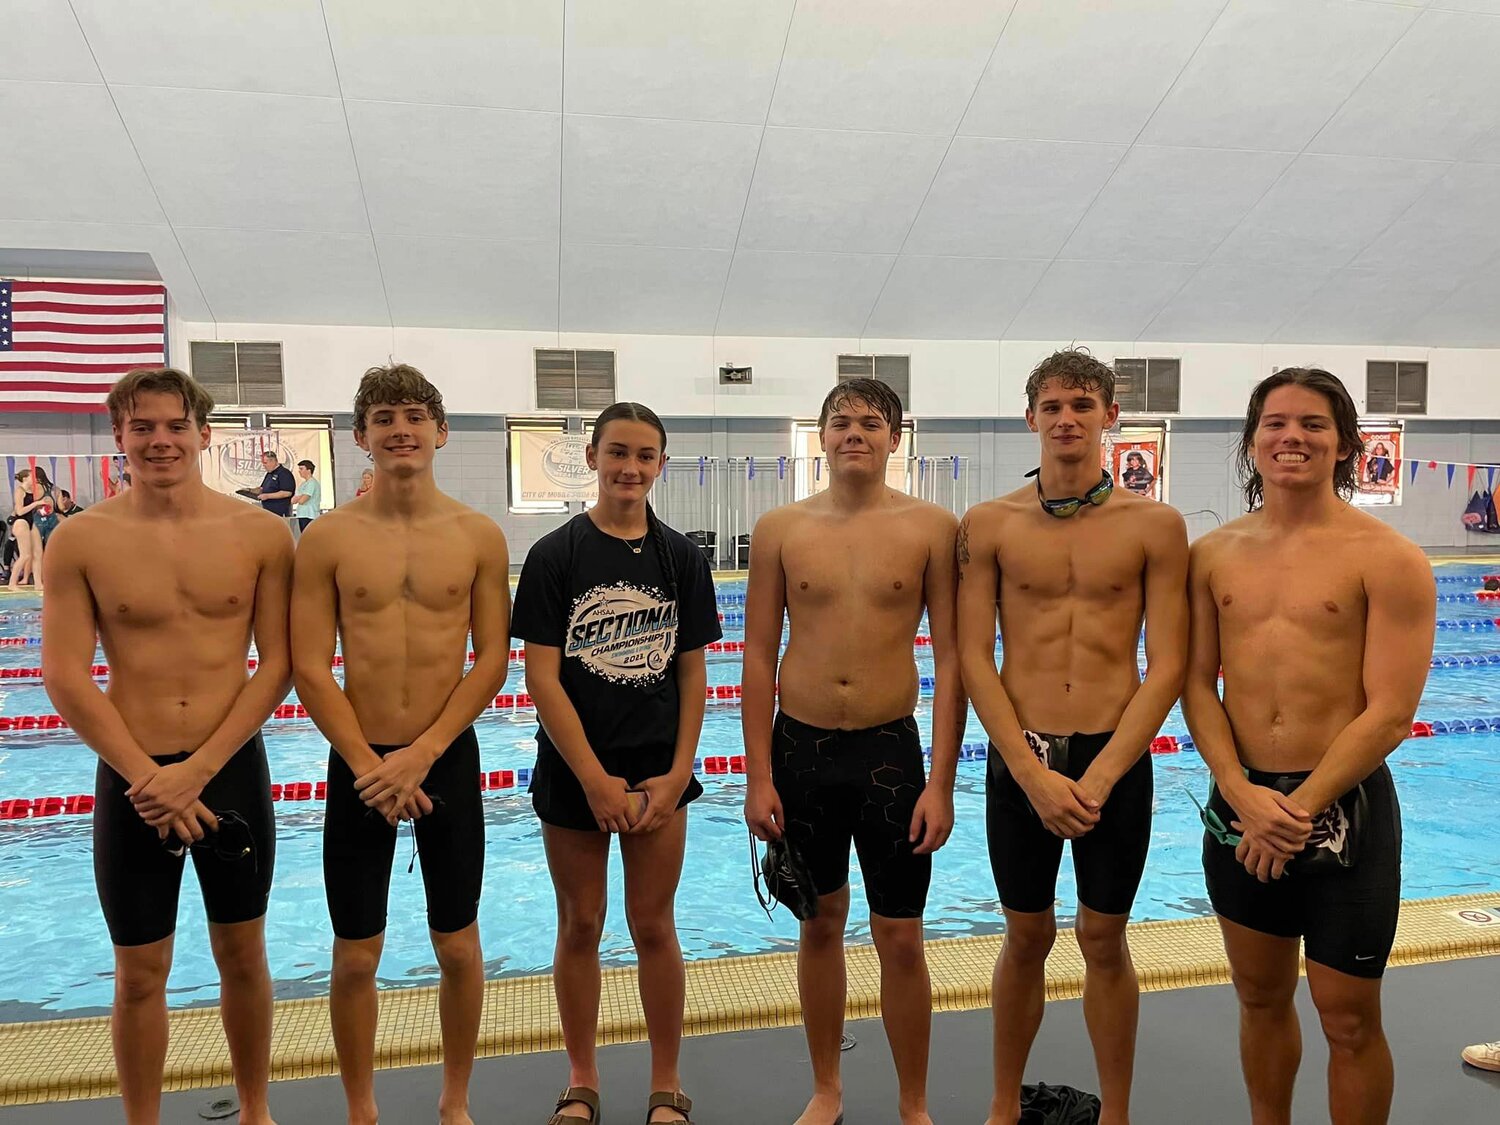 The Baldwin County Tigers were among local teams who had top finishes at the South Sectional Championship meet Nov. 17 and 18, including top-10 spots from Patrick Fitzgerald in the 100-yard fly and 200-yard individual medley.